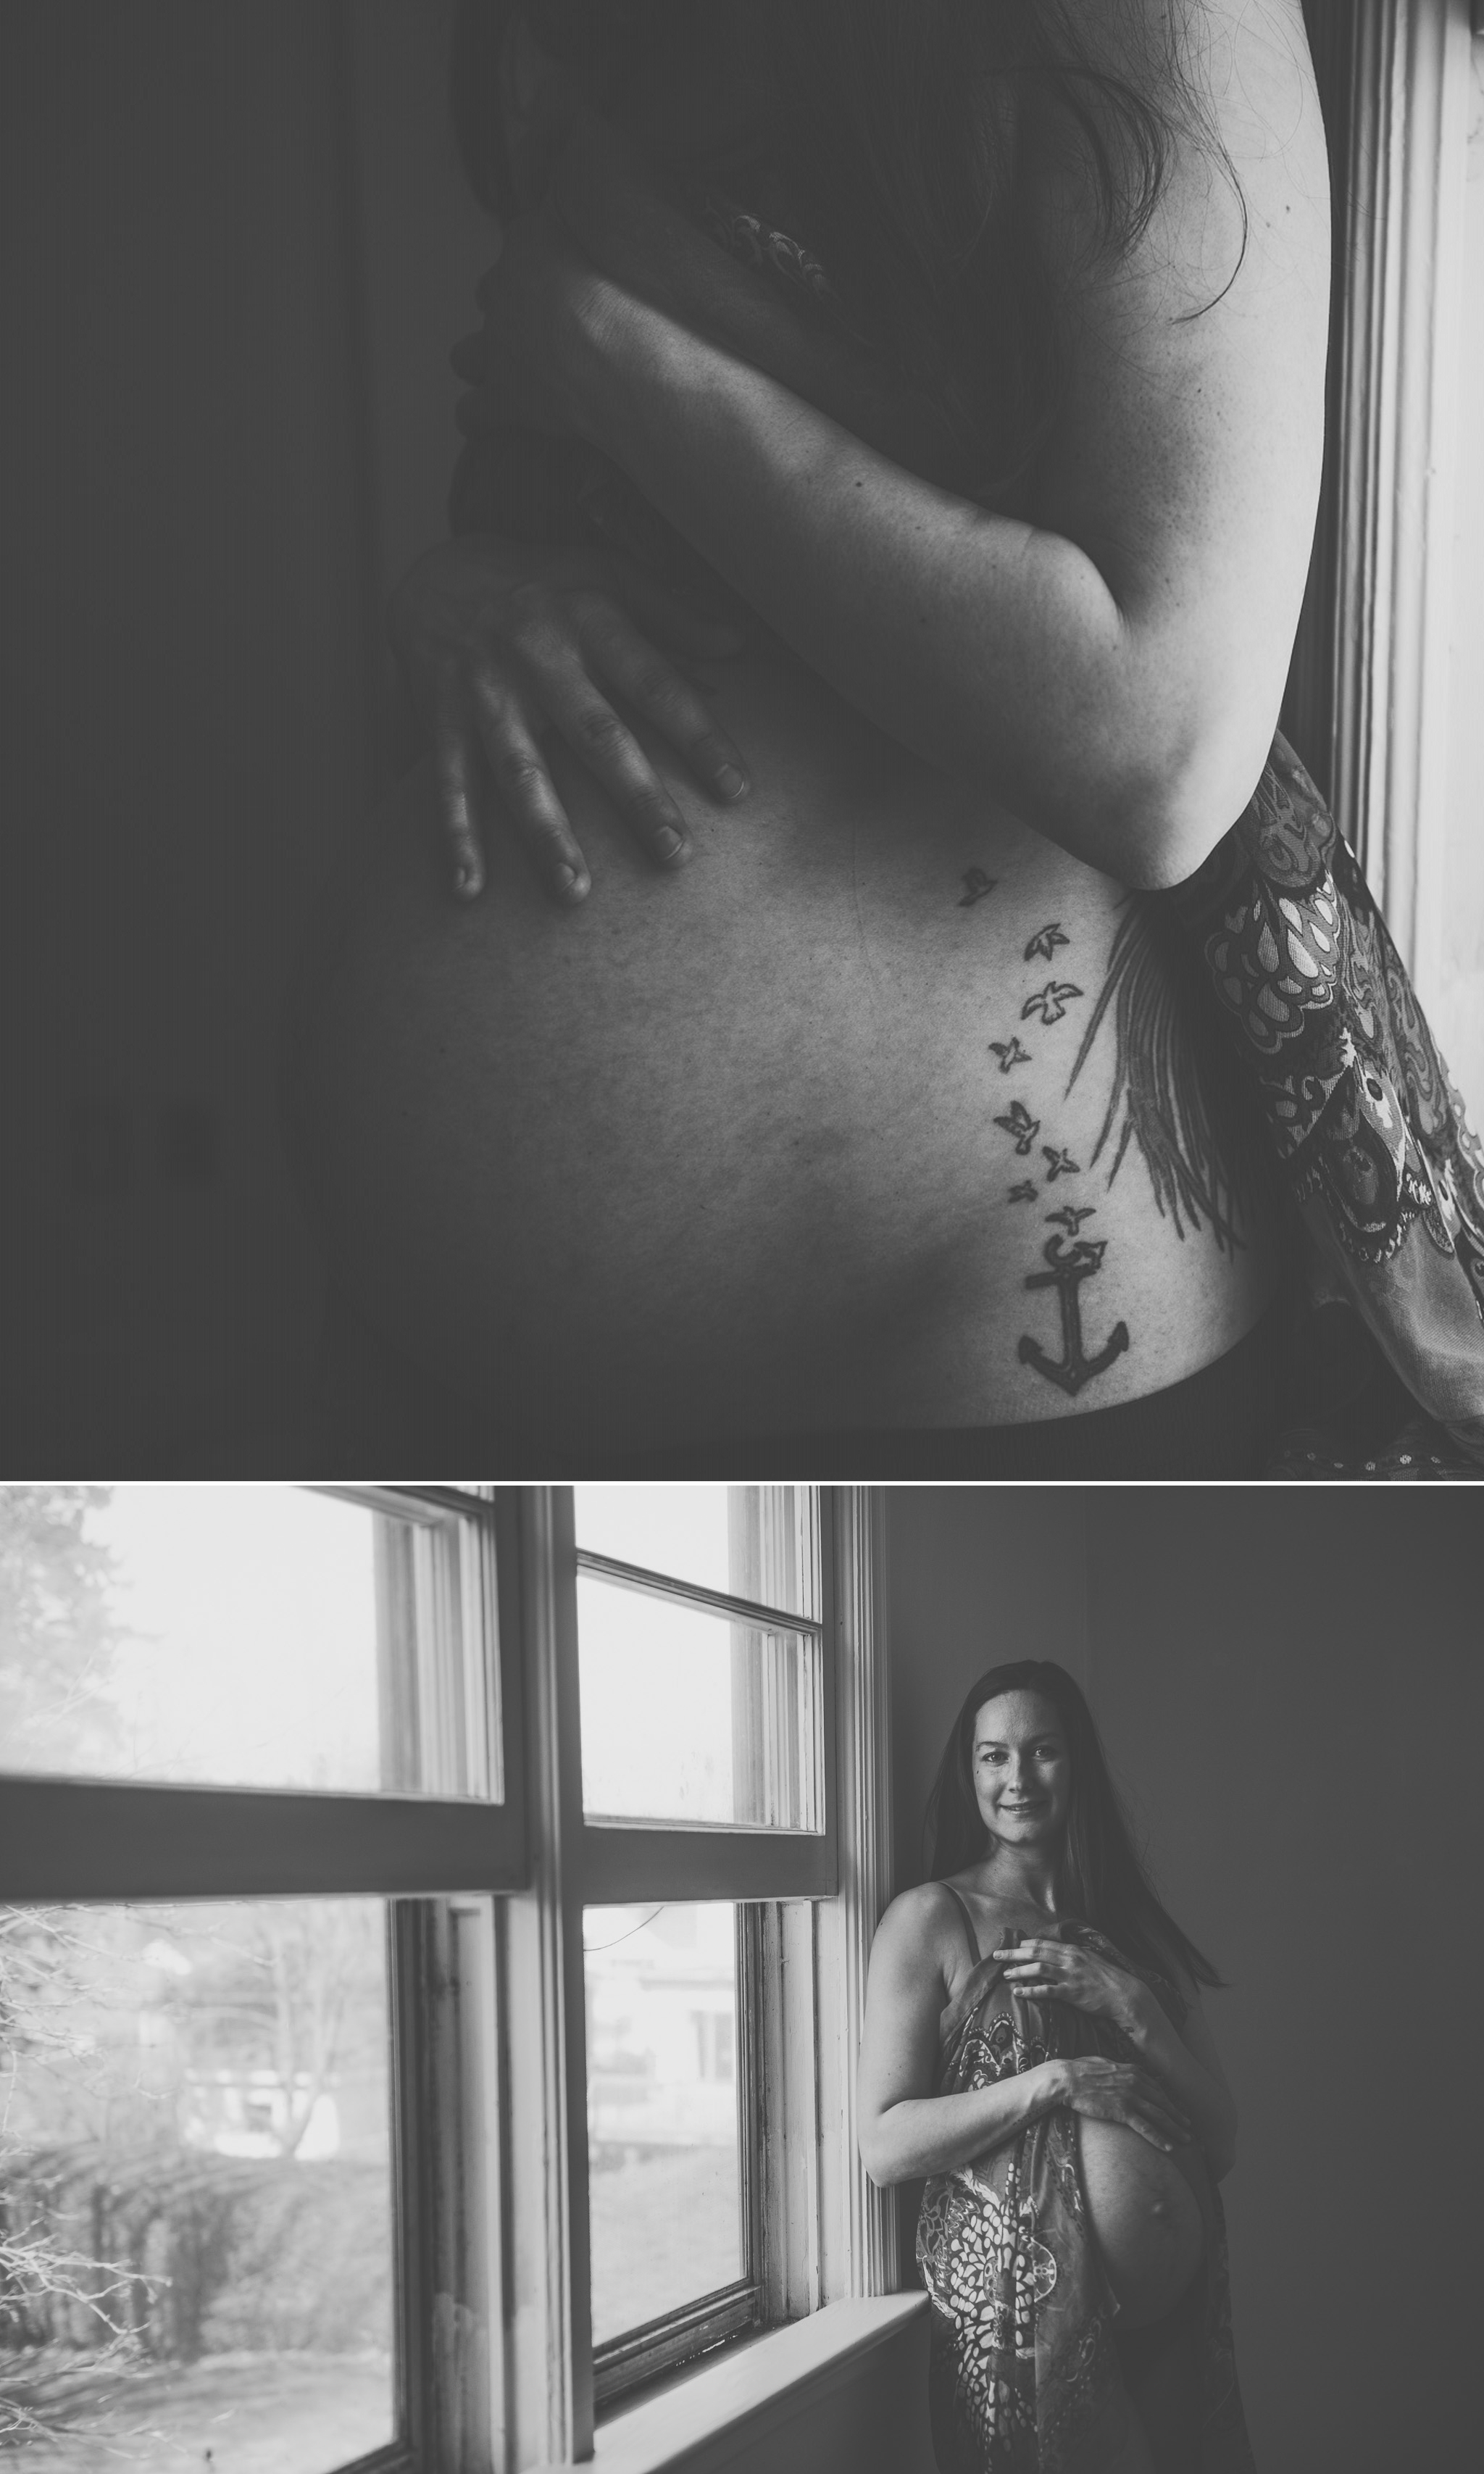 maternity, boudoir, photography, portraits, light, home, tattoos, tattooed female, anchor, anchor tattoo, window light, black and white